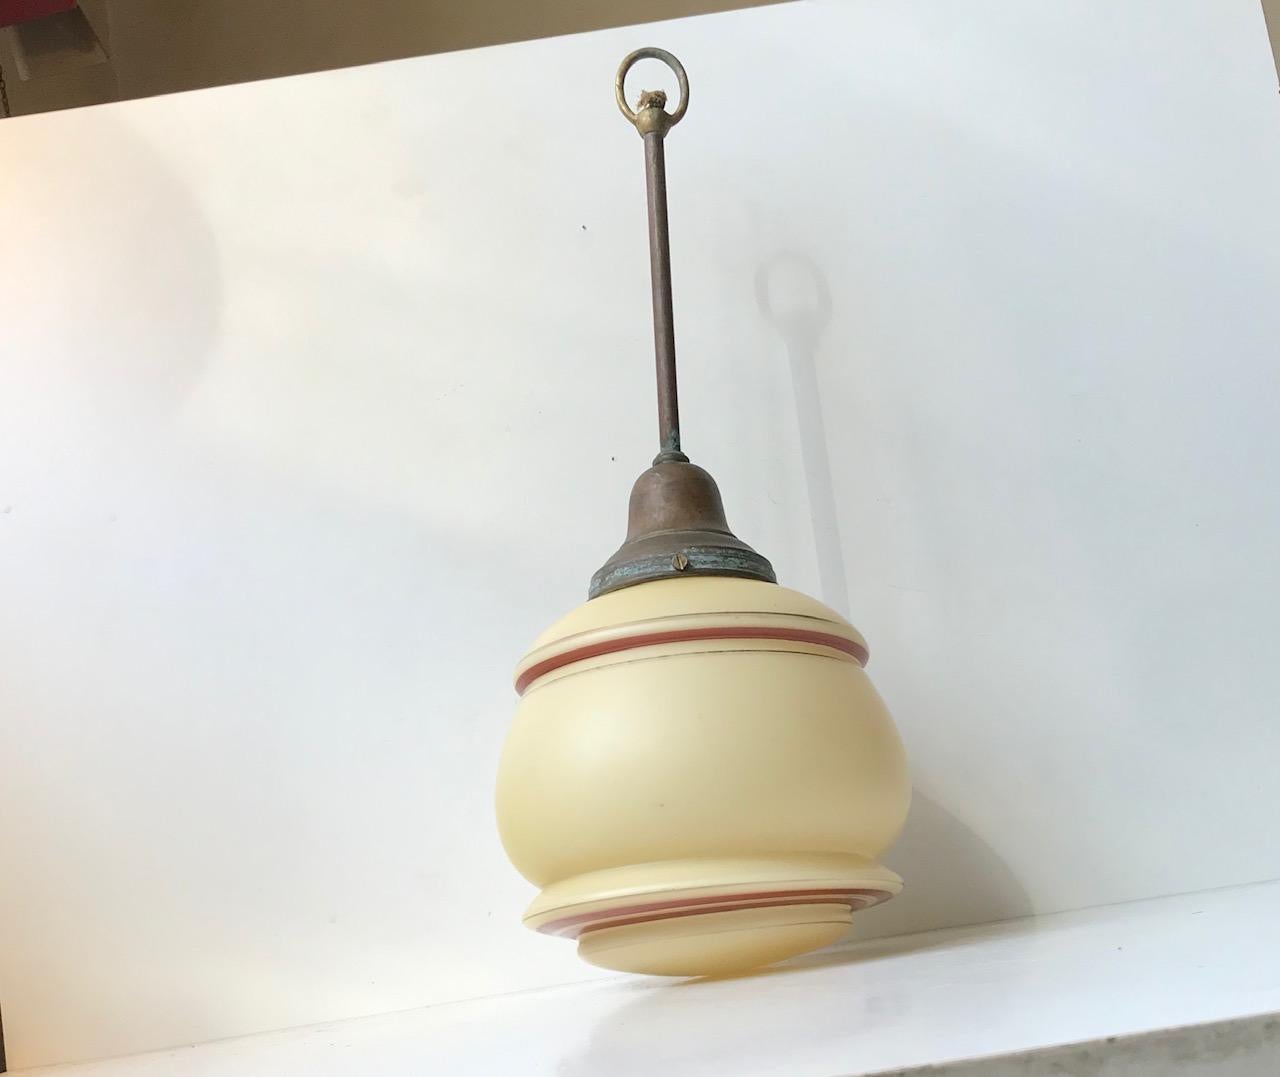 Entrance hall pendant light composed of pastel yellow opaline glass decorated with stripes. The pendant features a lopped patinated brass socket - top. It was manufactured in Denmark during the 1930s or 1940s.